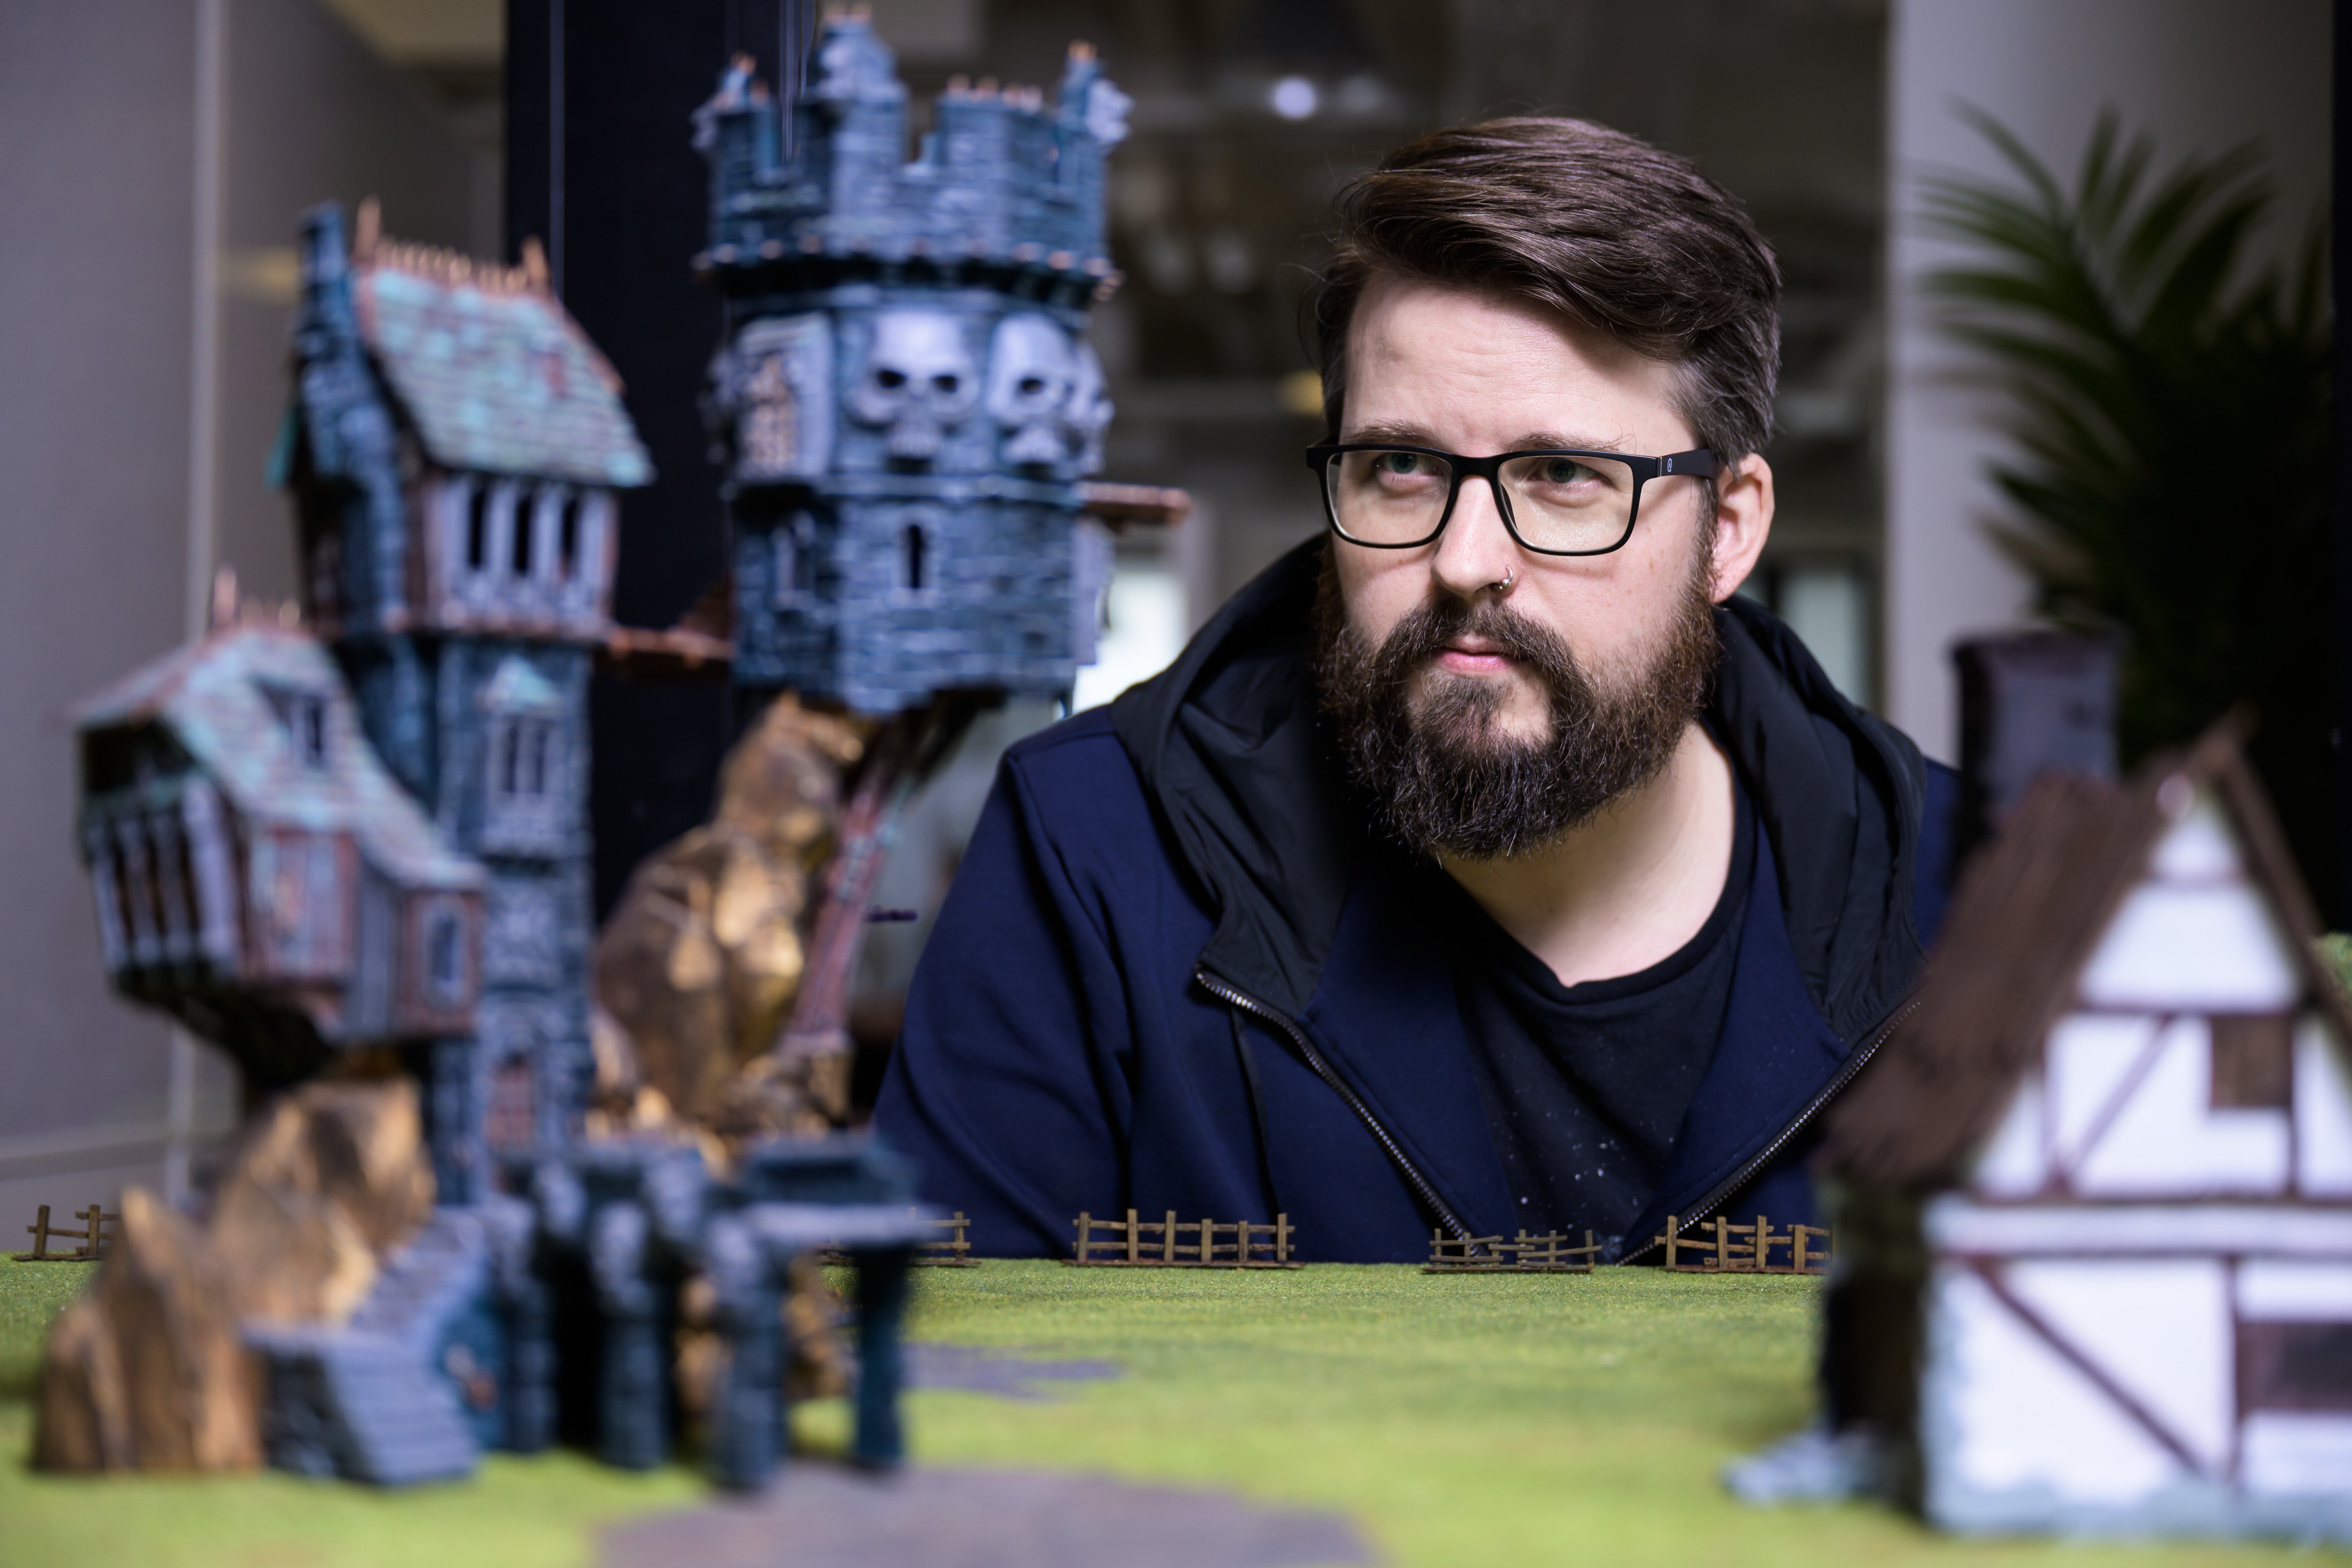 Darktide preview - Fatshark's Mats Andersson surveys a tabletop layout of Warhammer buildings and objects